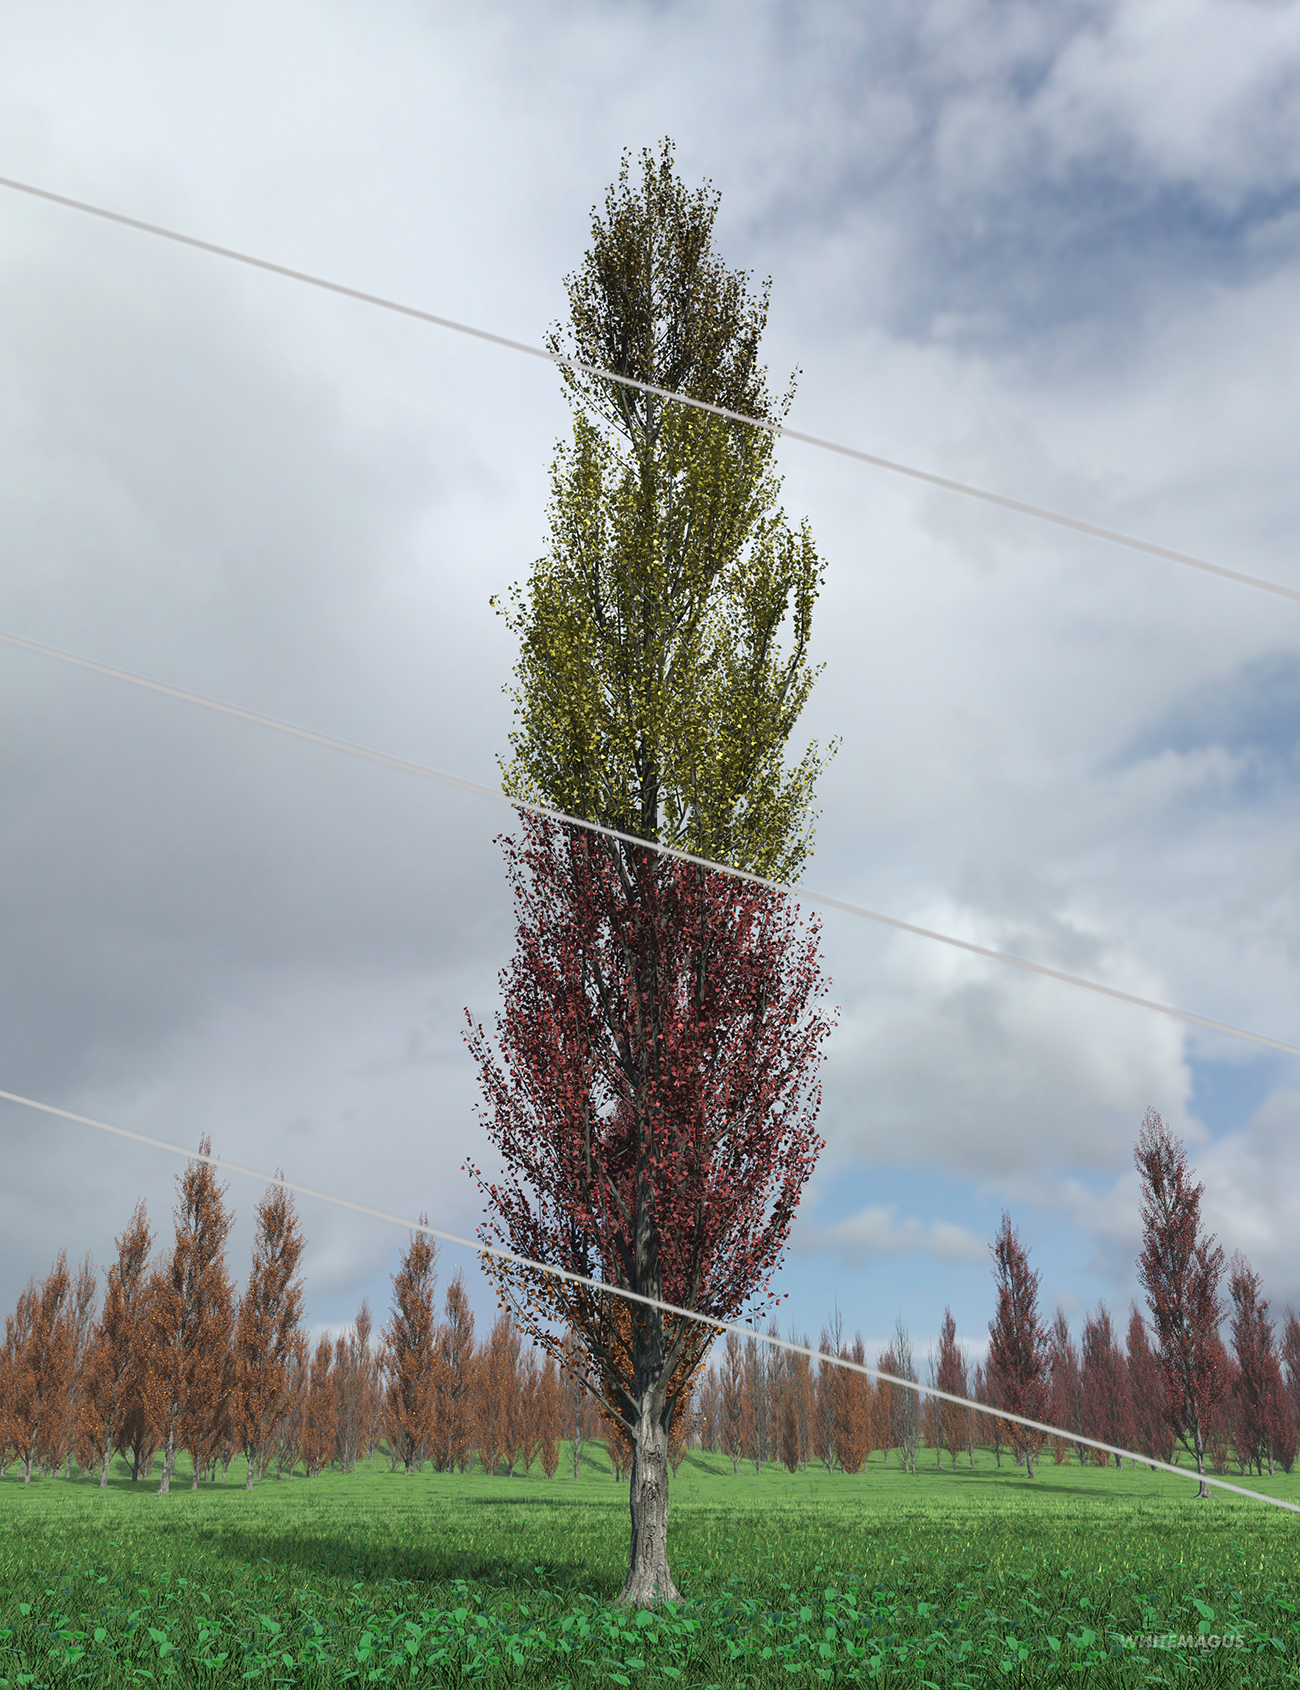 PTU Poplar Trees Ultimate by: Whitemagus, 3D Models by Daz 3D